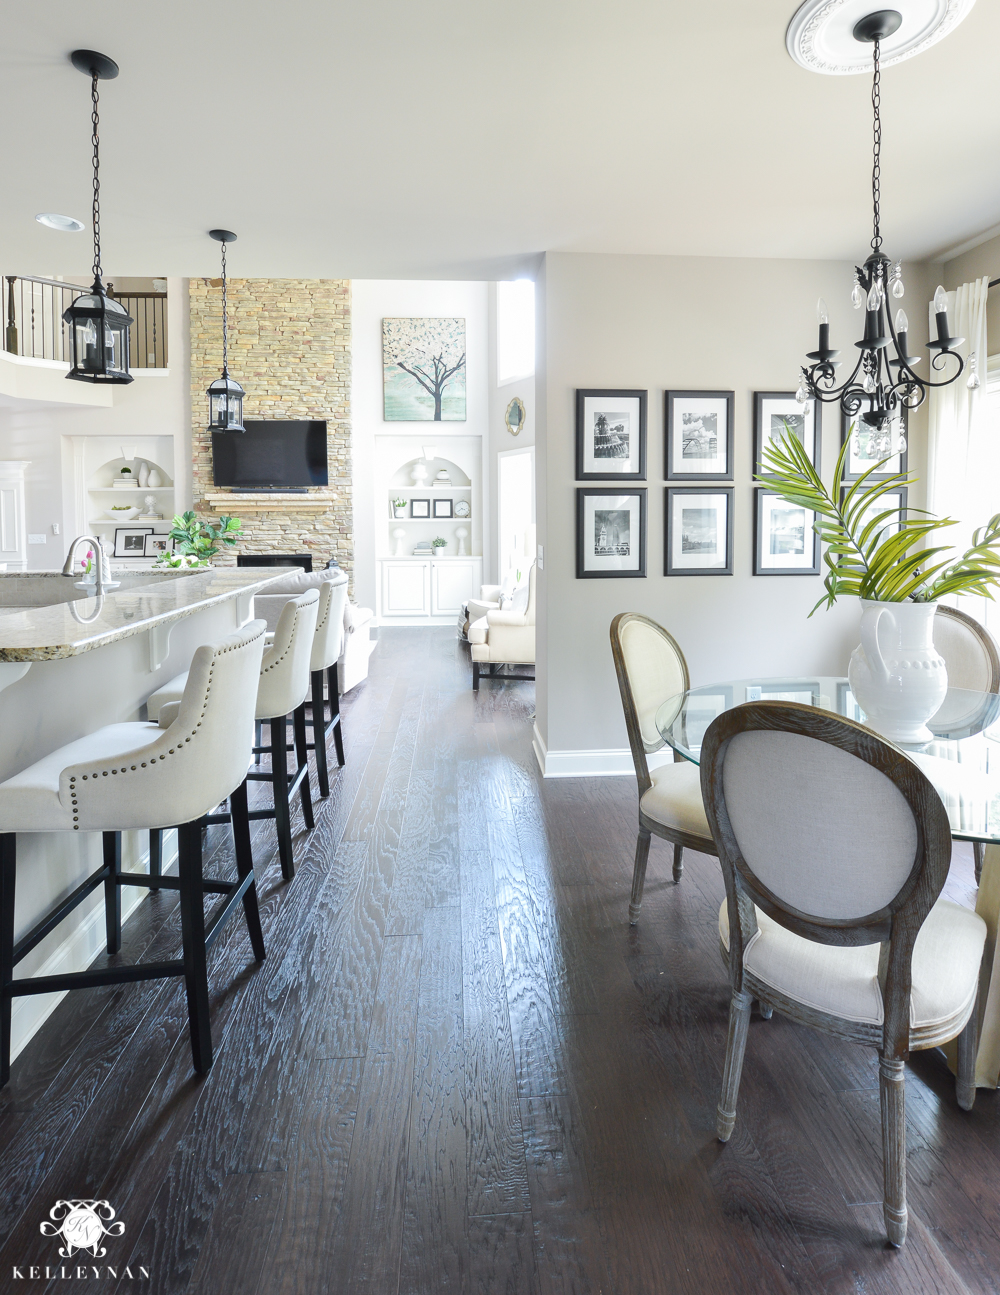 Shades of Summer Home Tour with Neutrals and Naturals-kitchen nook with bar stools and black and white gallery wall